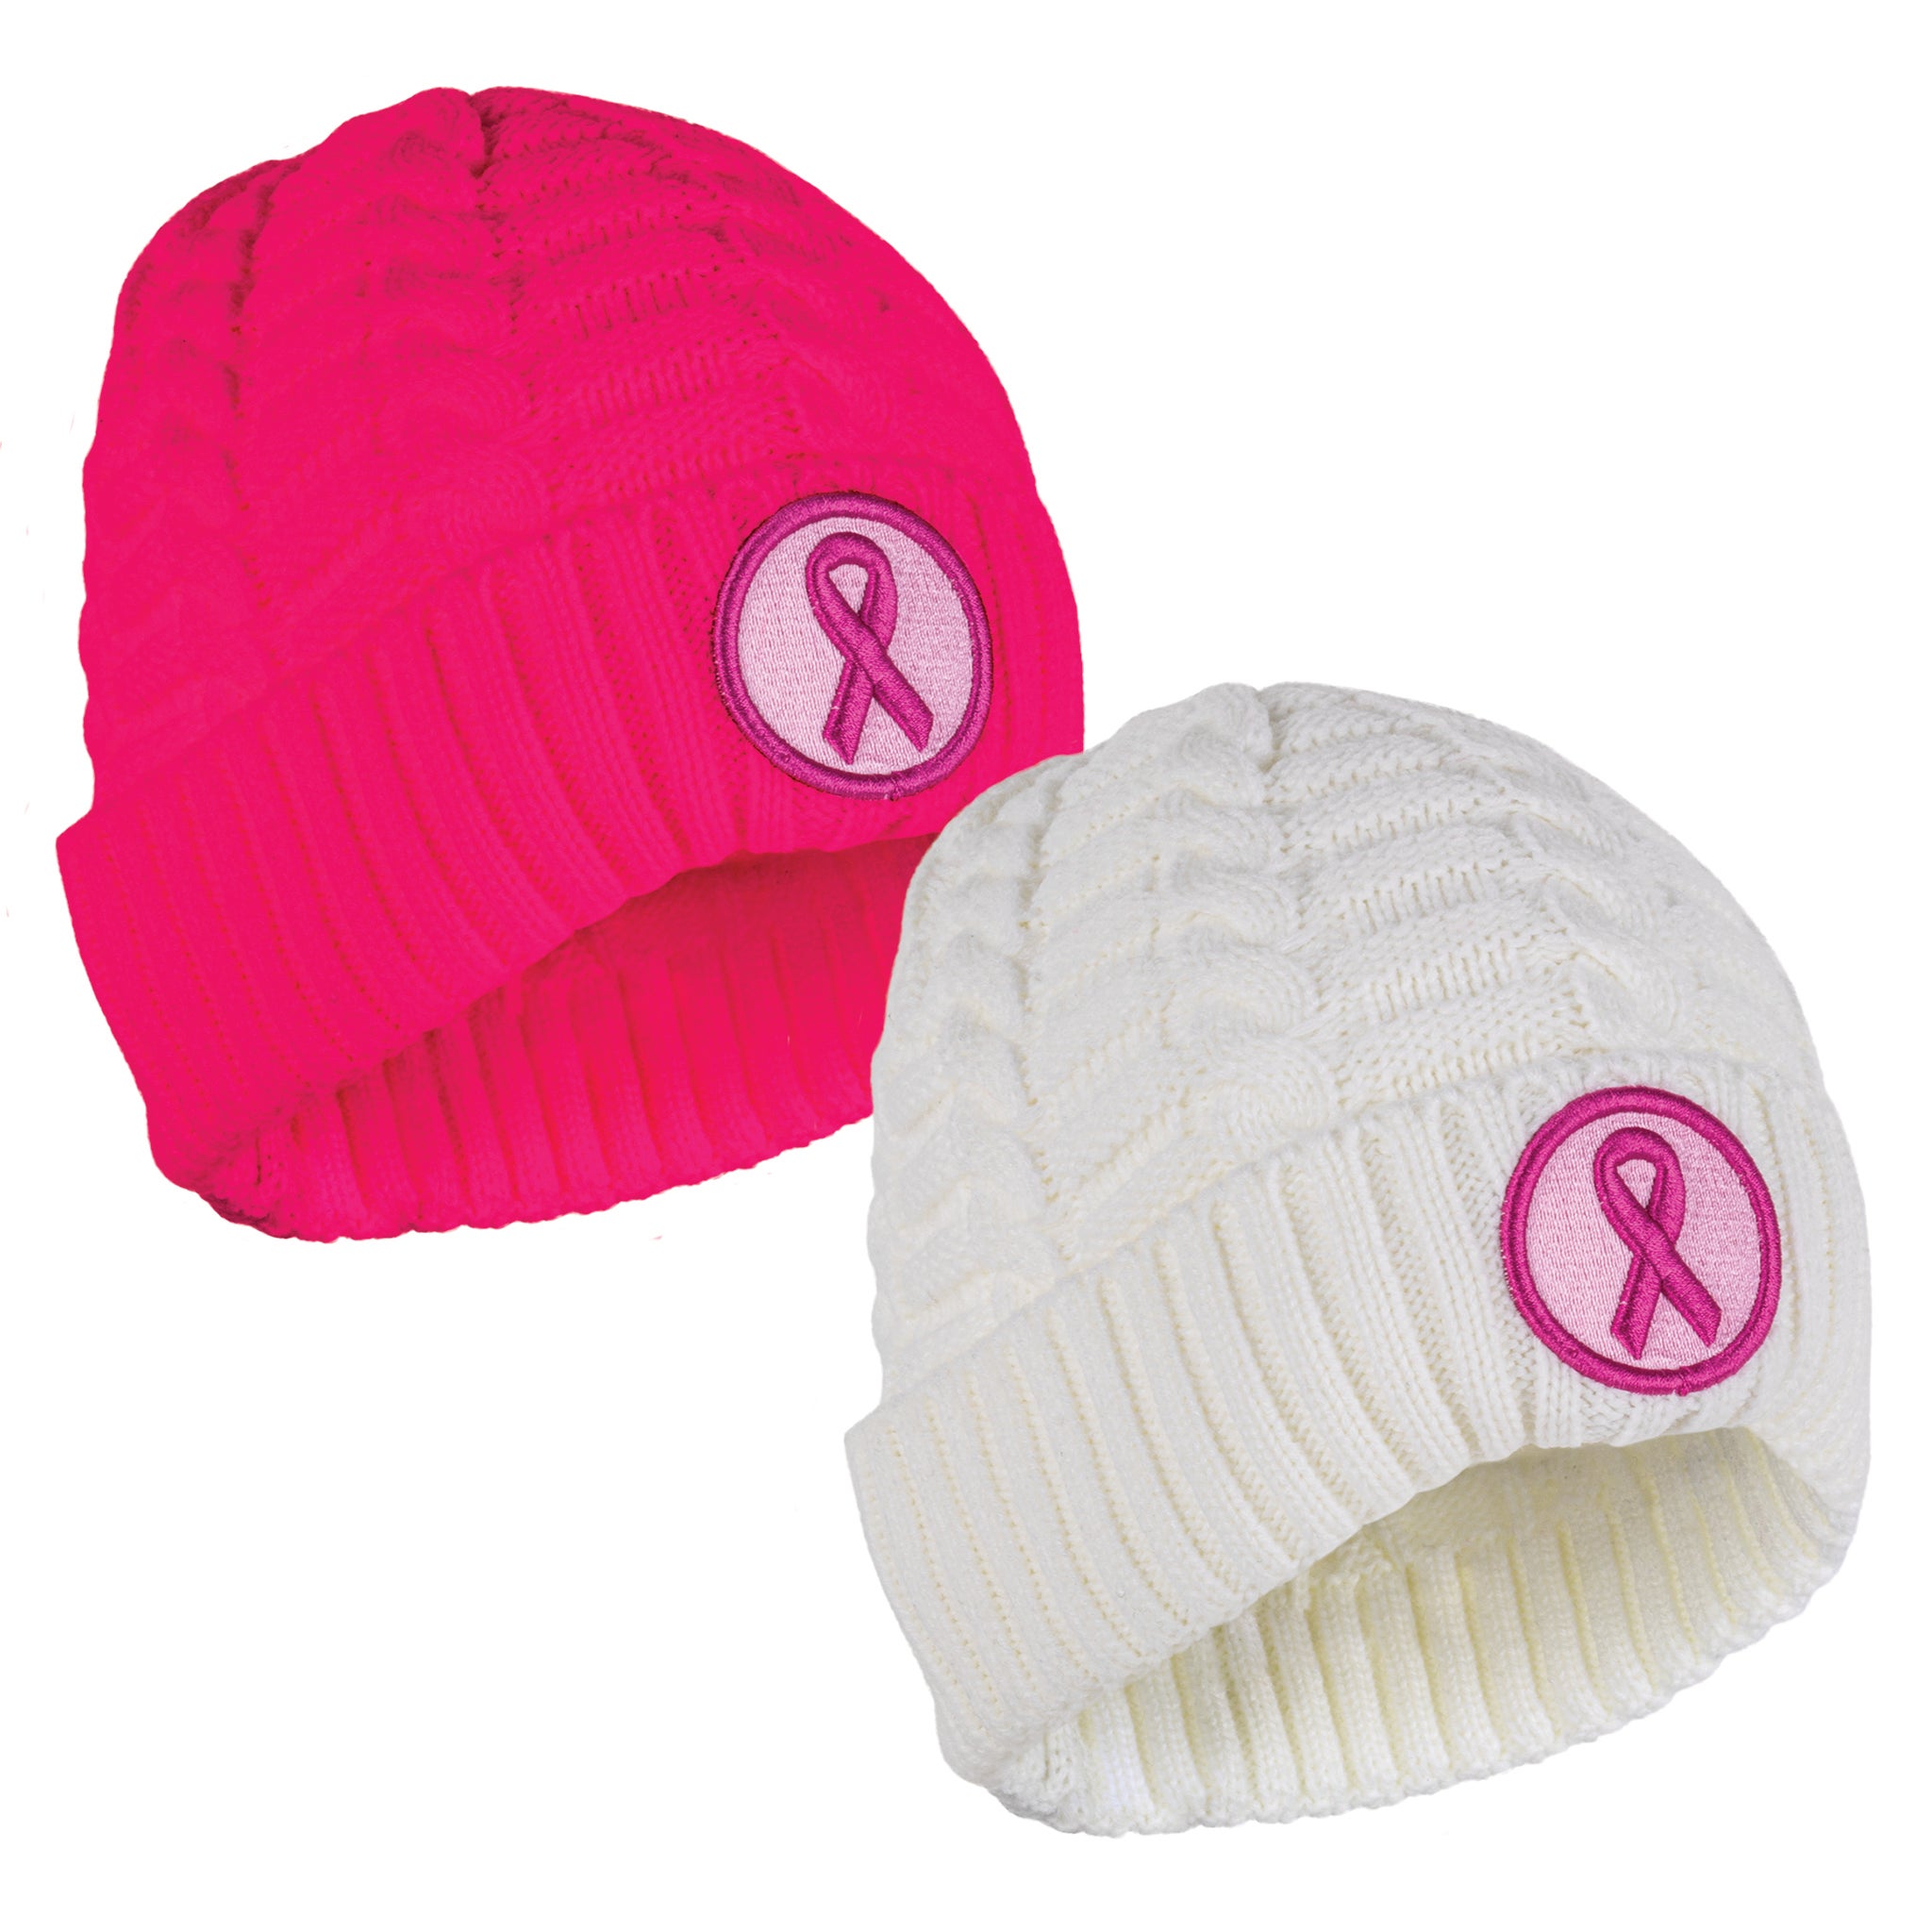 Under Amour Women's Power in Pink BCA Breast Cancer Awareness Beanie Hat S126